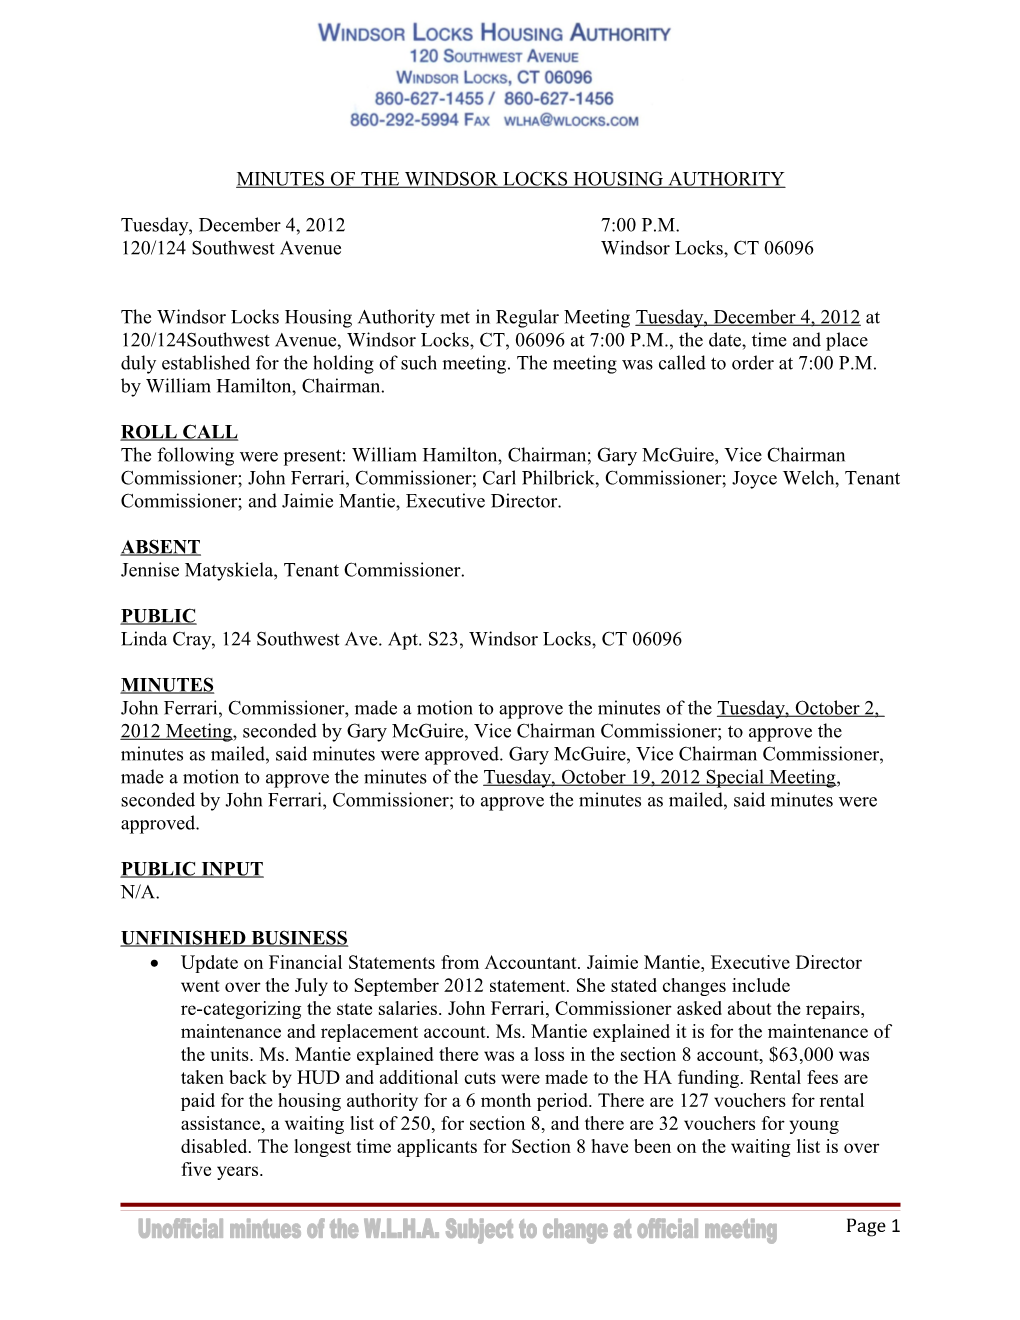 Minutes of the Windsor Locks Housing Authority s2